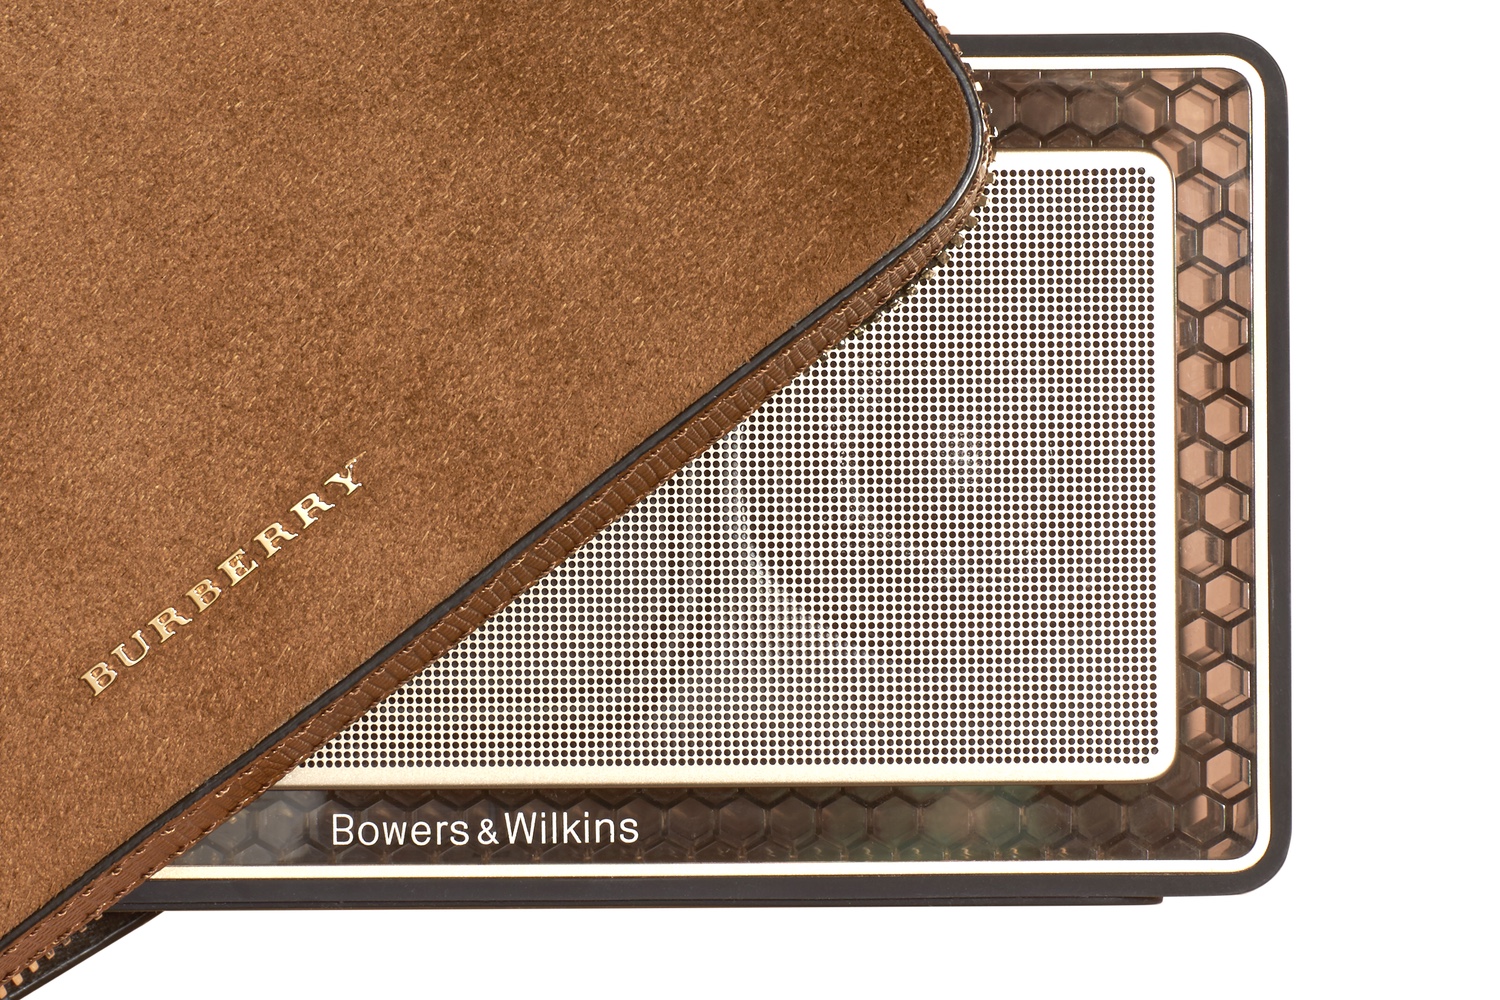 bowers wilkins burberry t7 bluetooth speaker and gold edition 9